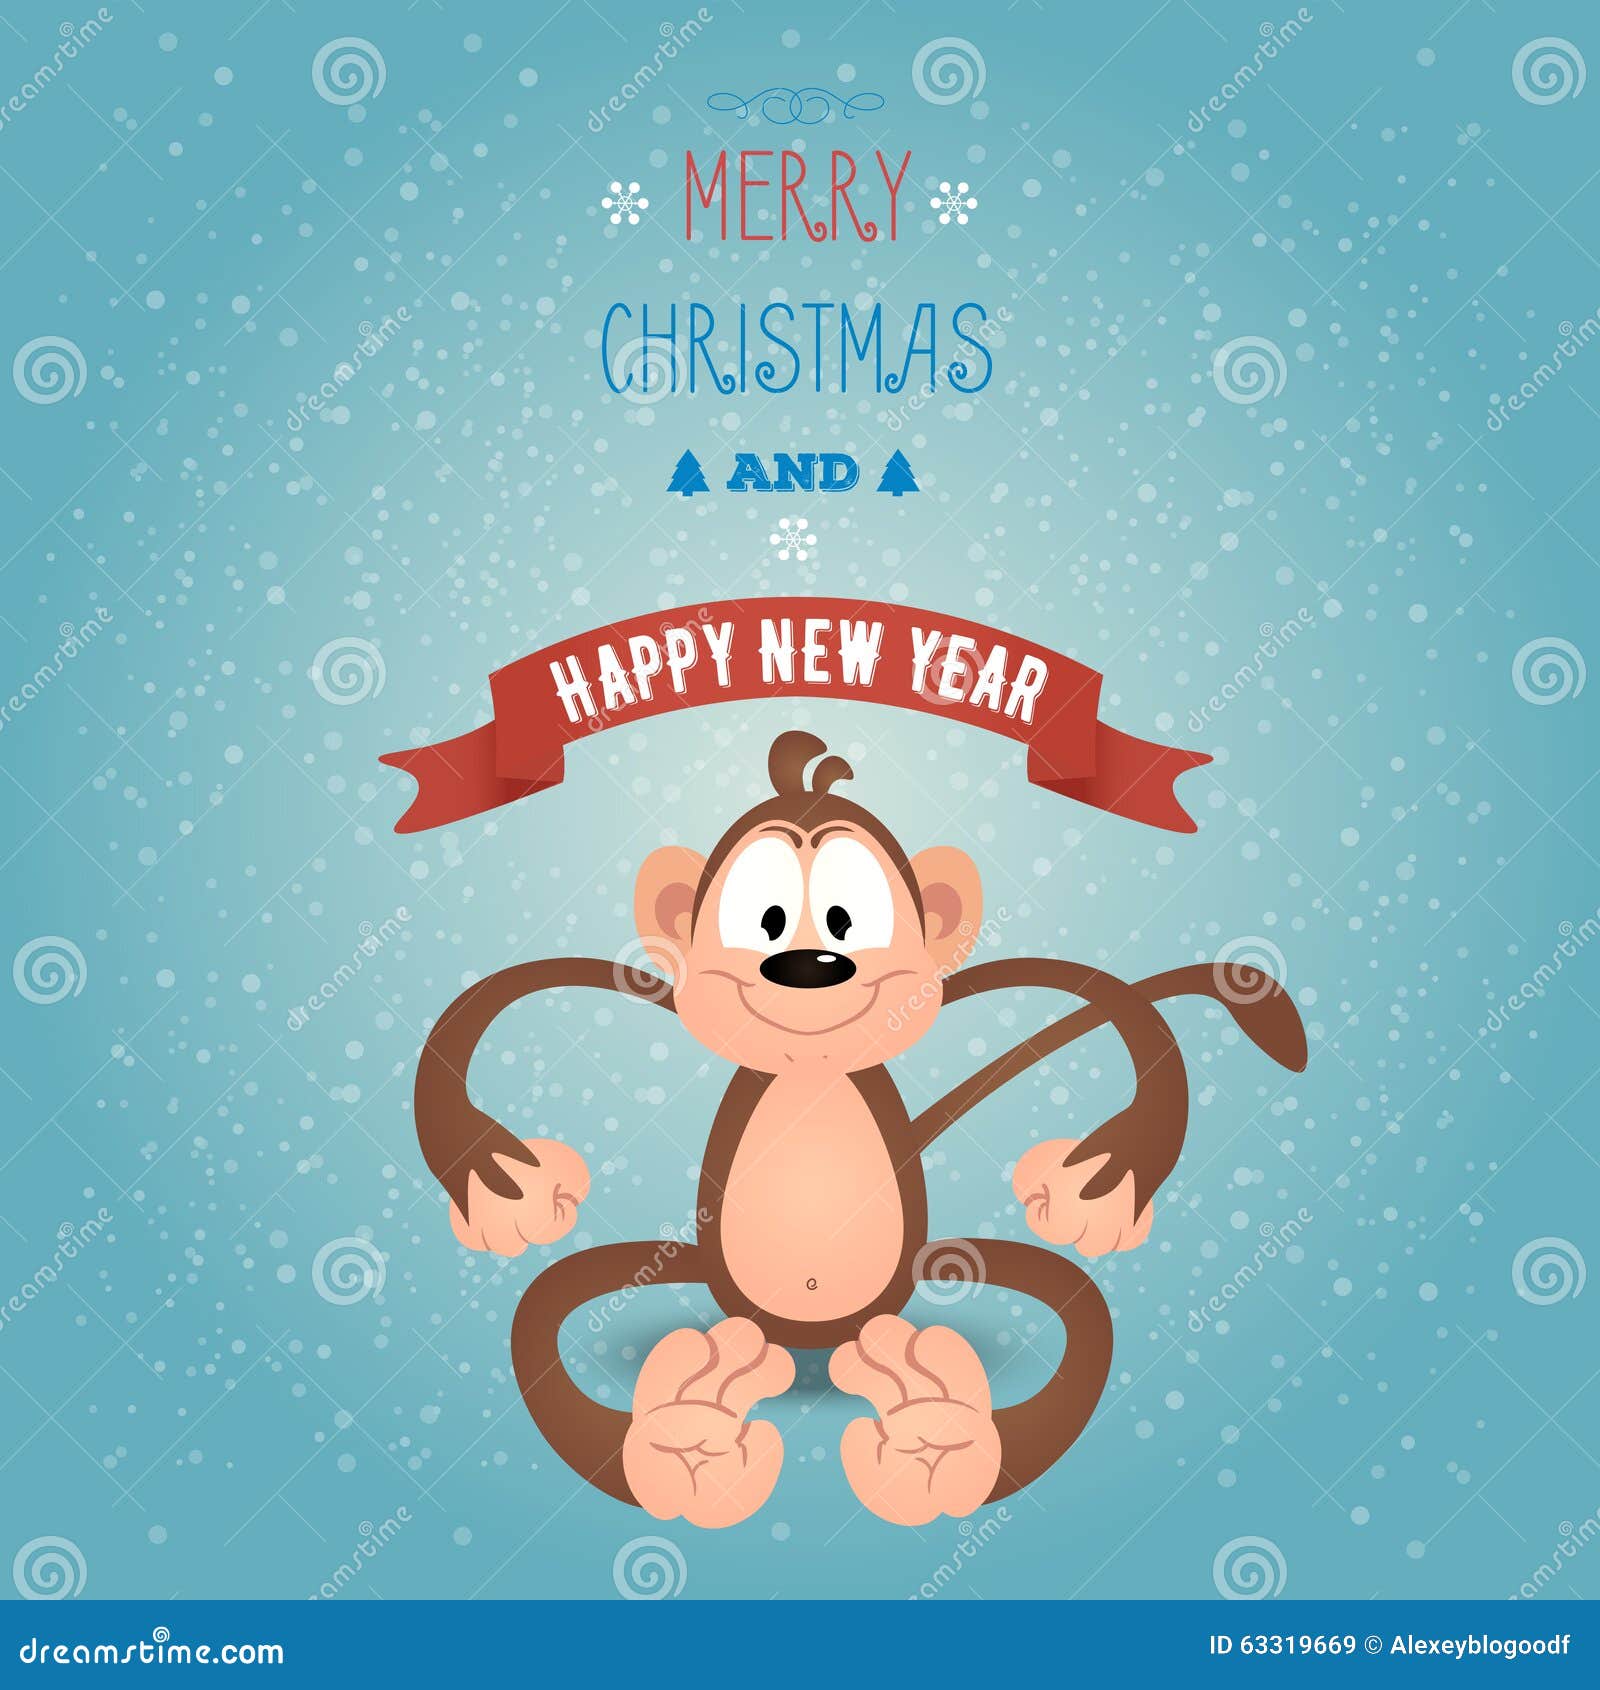 Greeting Card Merry Christmas And Happy New Year With ...